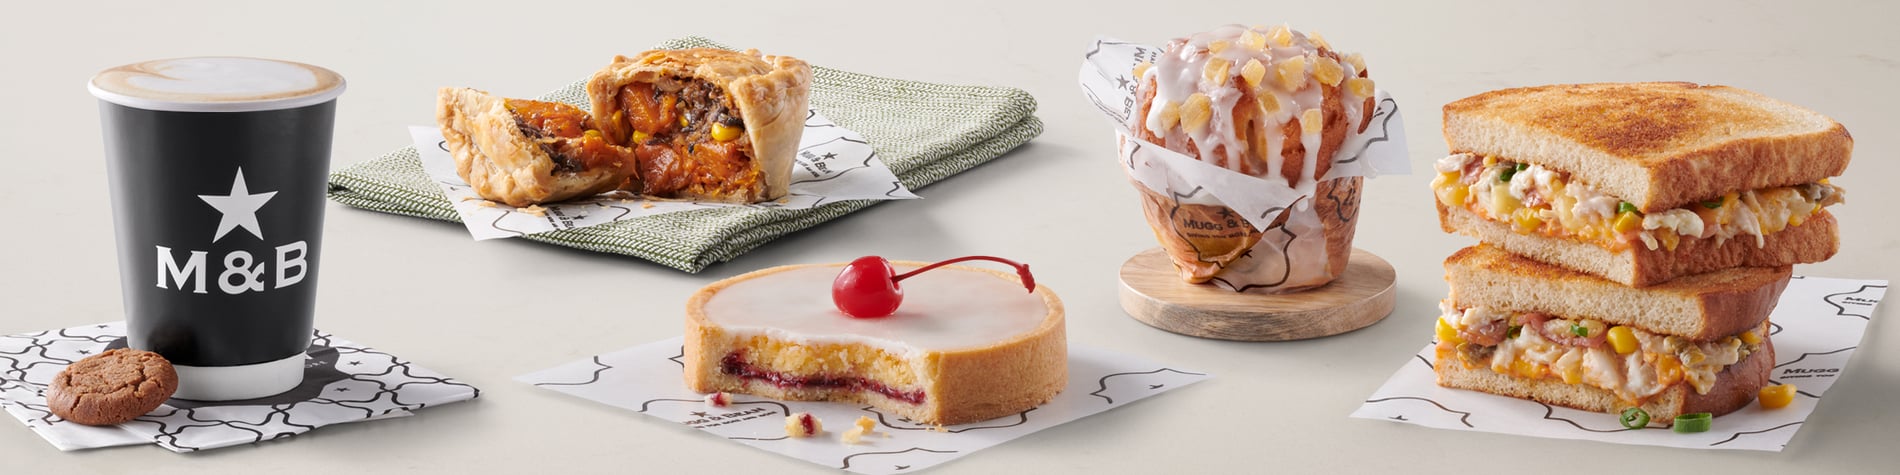 A selection of takeaway meals from the Mugg & Bean On-The-Move menu including a Mexican Chicken Toasted Sandwich, vegetarian Pot Pie, Gingerbread Latte hot drink, freshly baked citrus & ginger muffin, and a slice of Cherry Bakewell Tart.